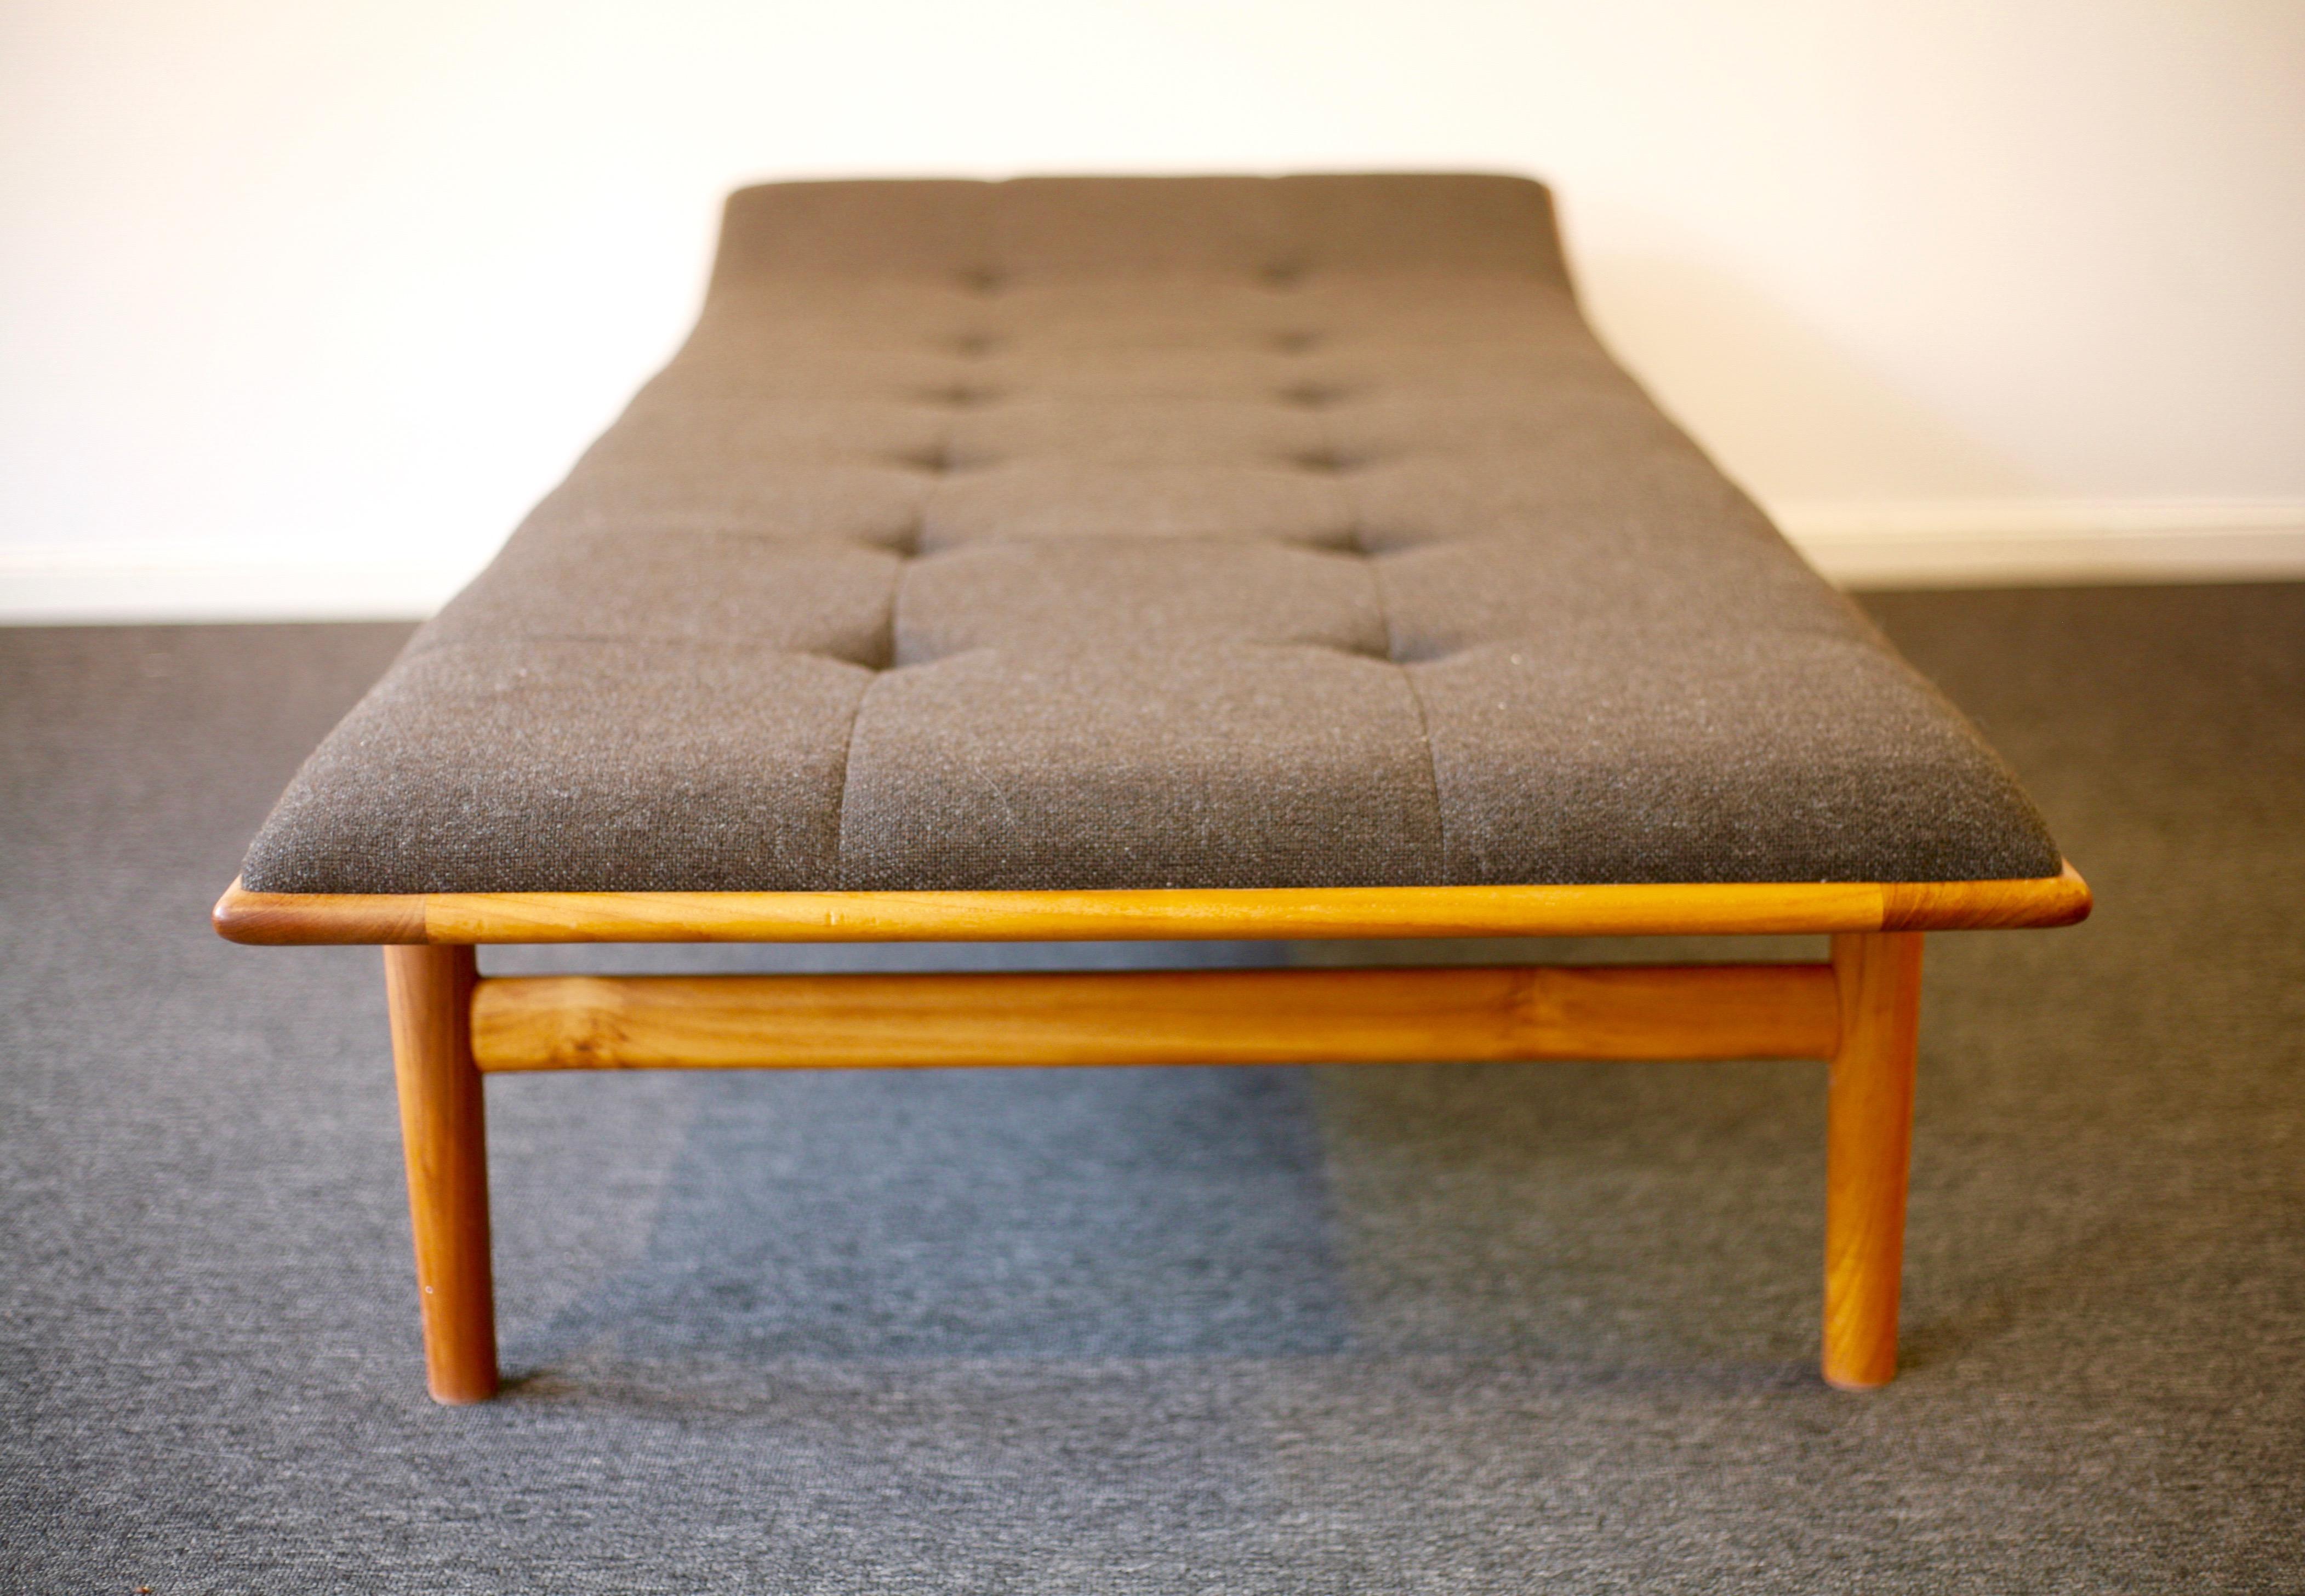 Daybed in solid teak, model no 311, designed by Kurt Östervig for Jason in 1953. Brown upholstery by Kvadrat, Hallingdahl 65 designed by Nanna Ditzel. Matress fastened to daybed to avoid sliding. Exquisite design and handcraft.